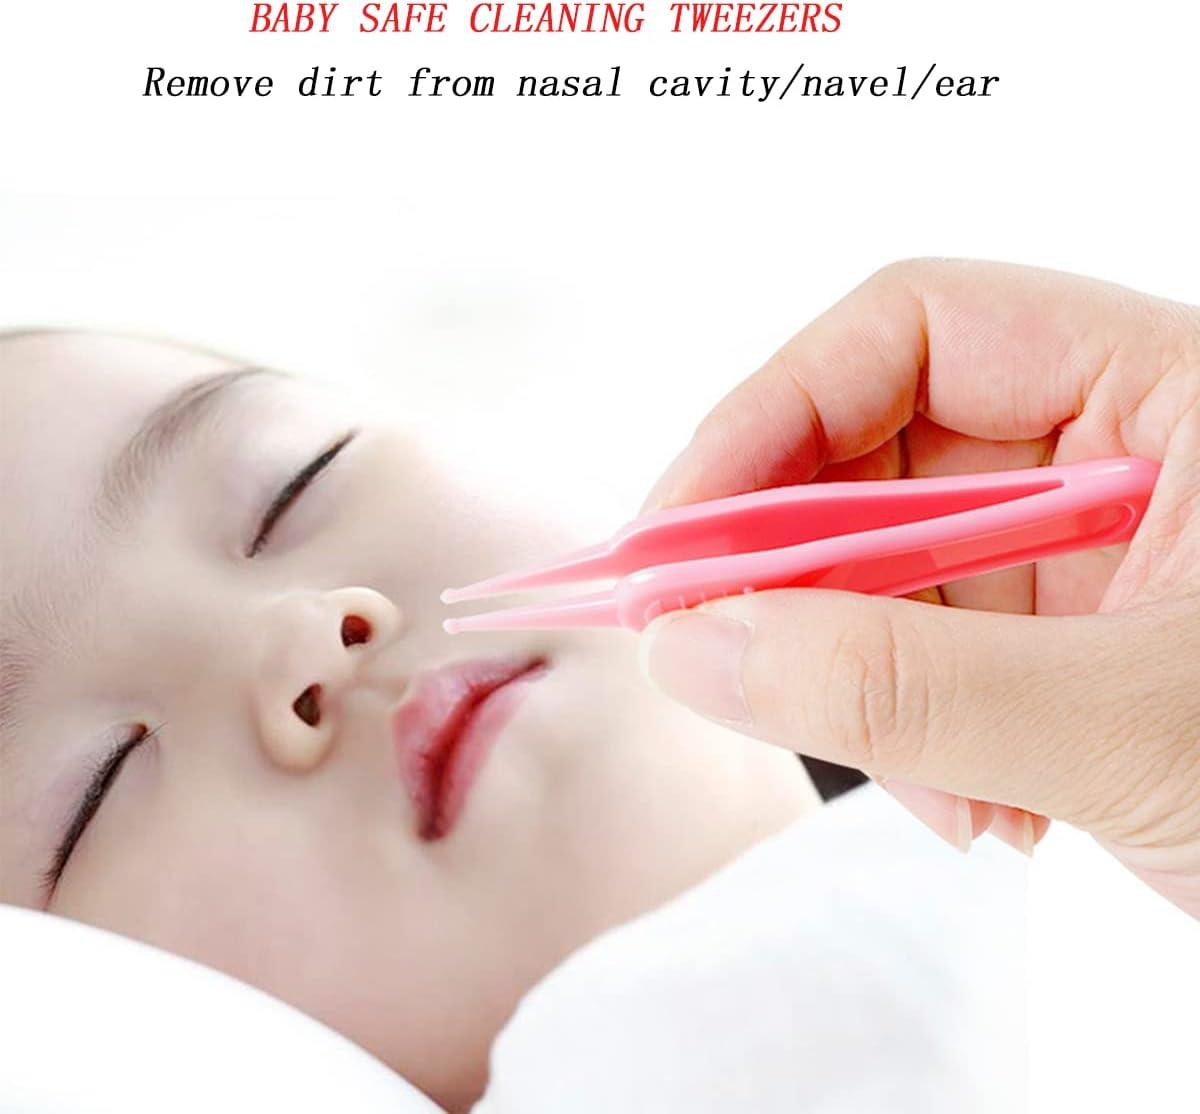 6 Pcs Baby Nose Tweezers Round Head Ear Tweezers Safety and Hygiene Toddler  Nose Cleaning Tweezers for Baby Care